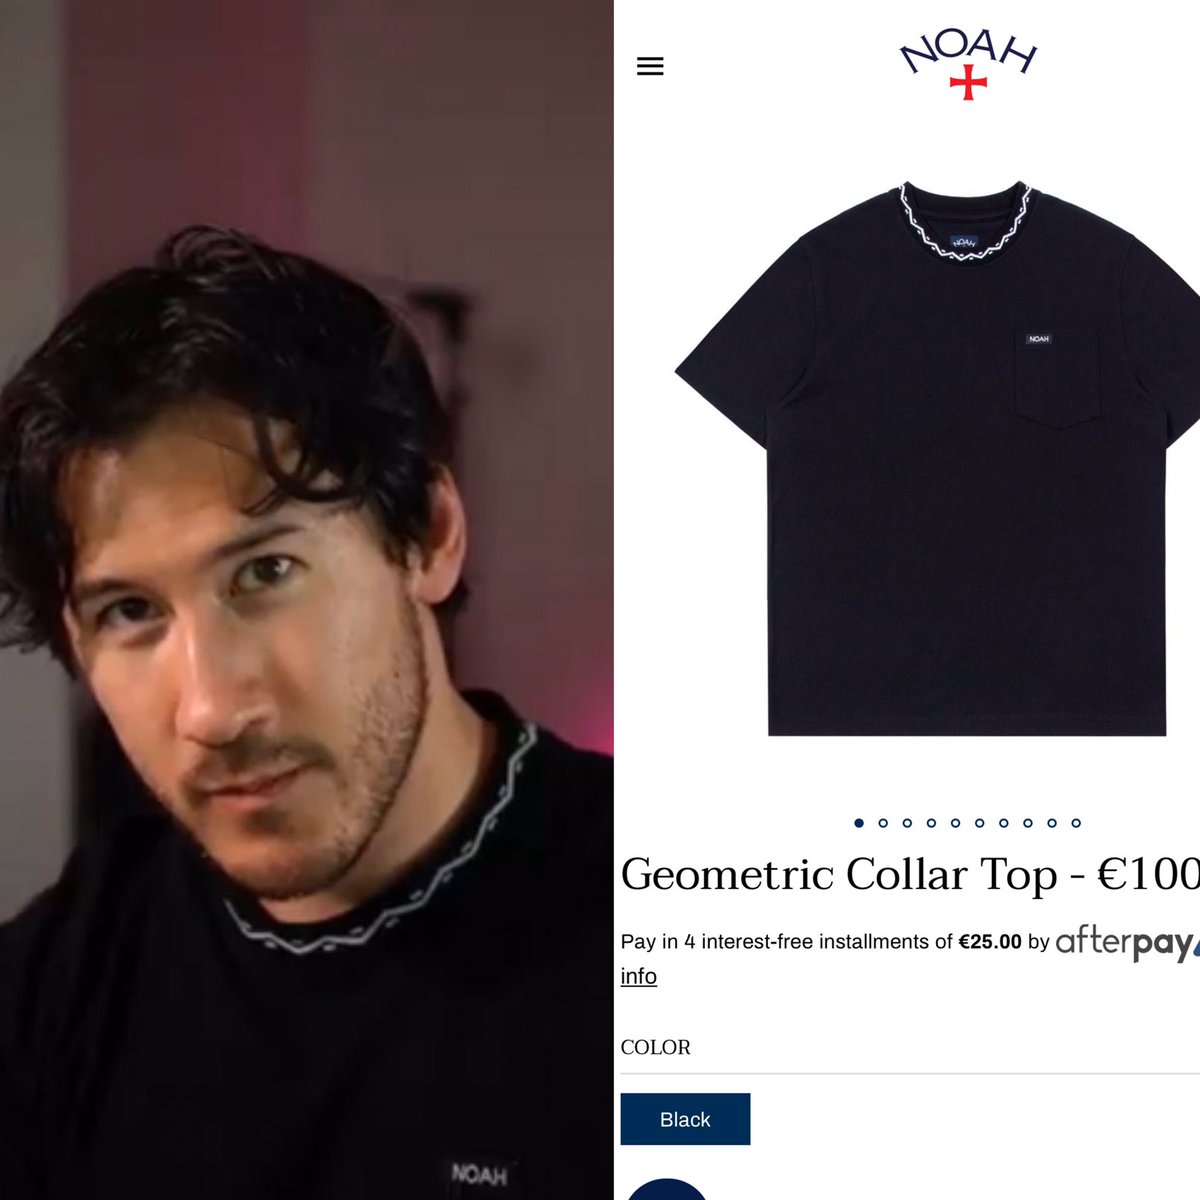 This top is also from NOAH. He wore this on a member stream recently. This one is still available in a few sizes! I really like the collar on this one and once again this looks really good on mark. I think amy bought this for him but i am not sure.  https://noahny.com/collections/tops/products/geometric-collar-top